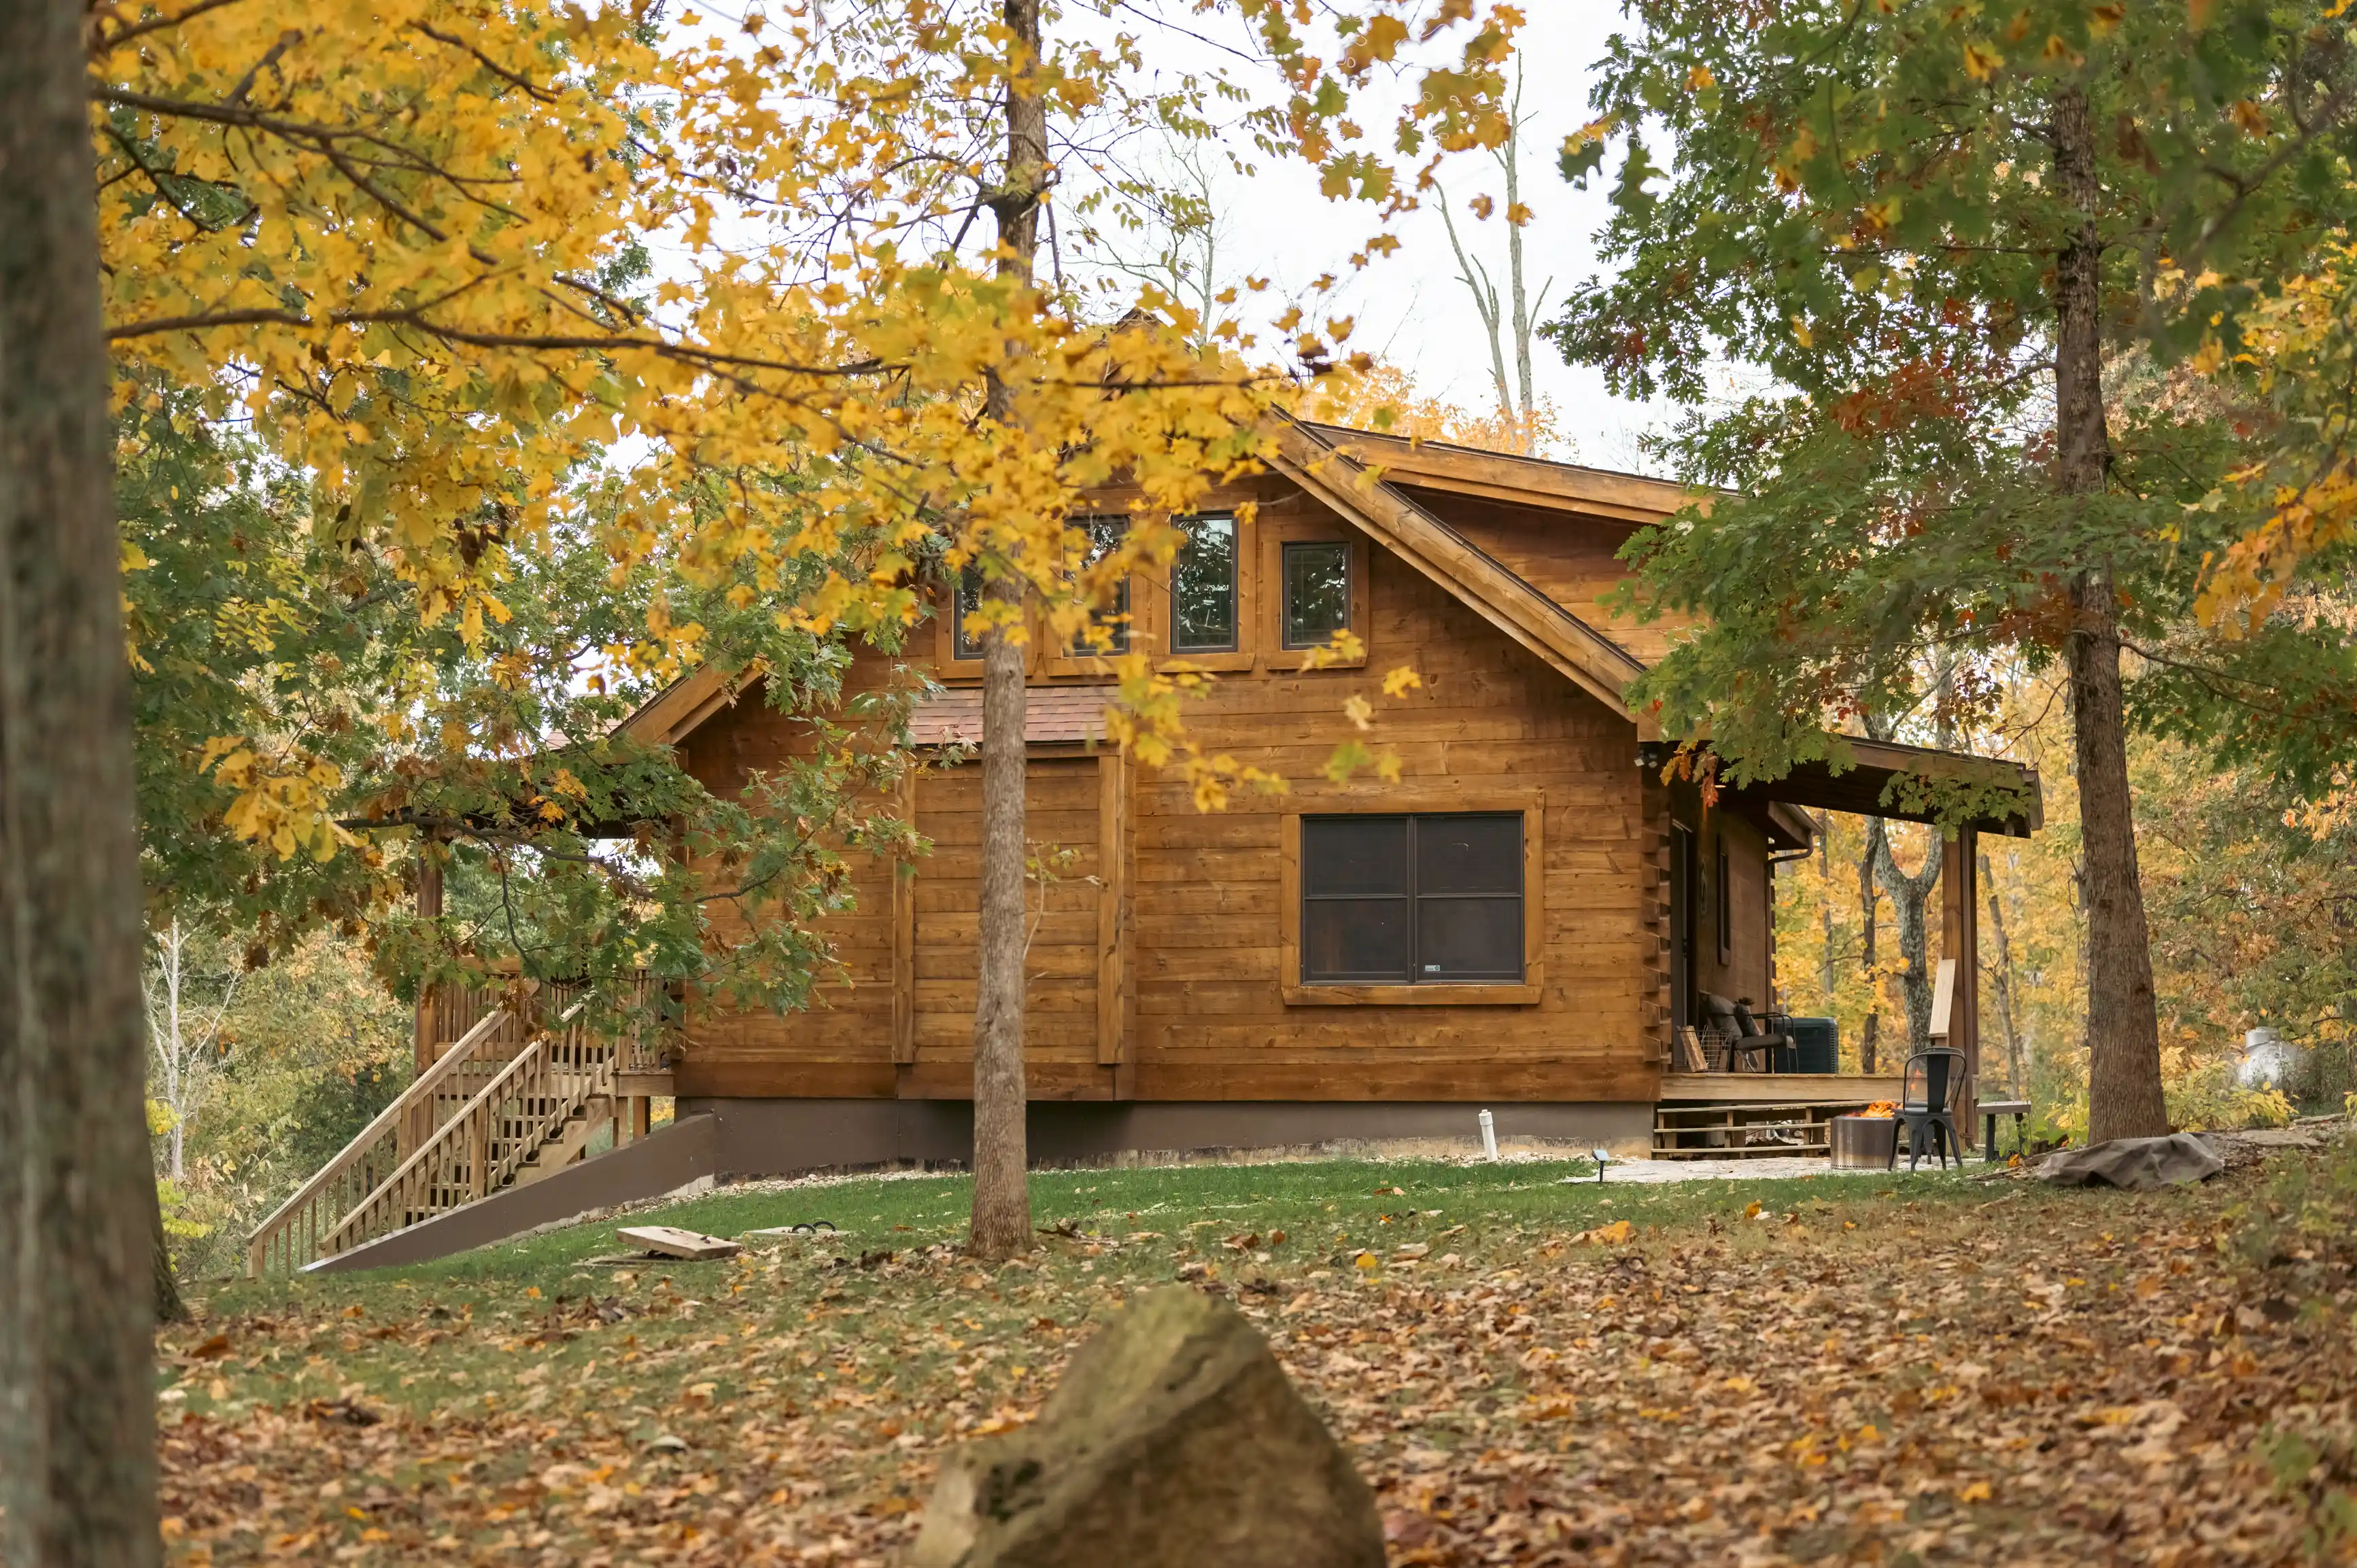 Wooden cabin surrounded by autumn foliage with a front porch and staircase.